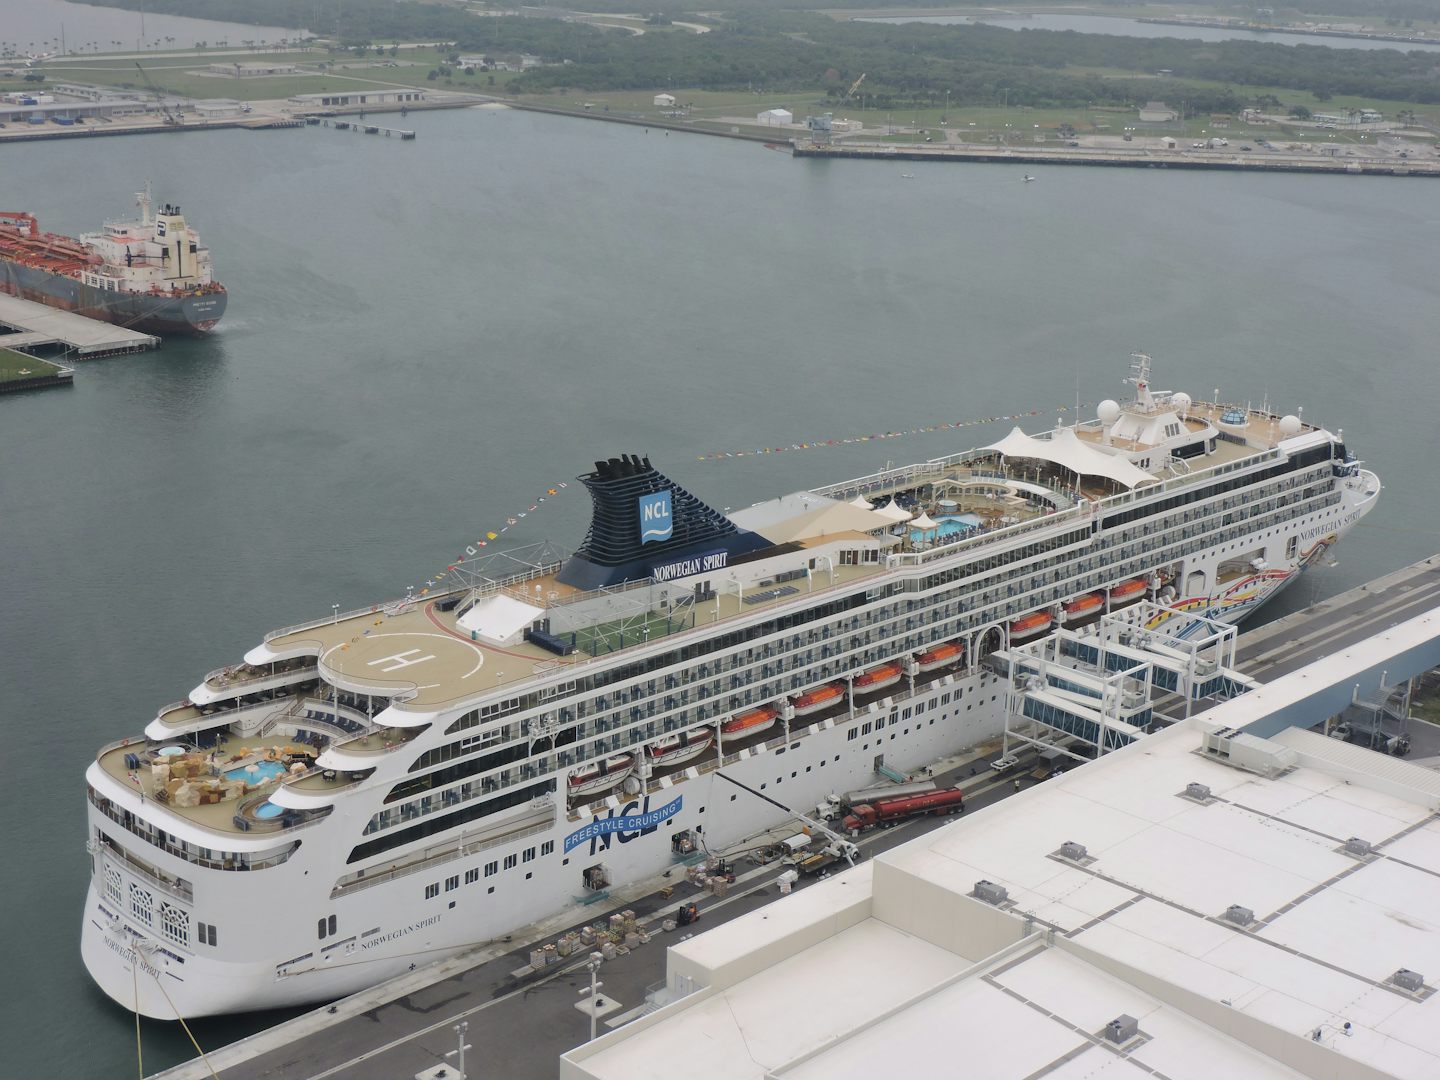 Overview of ship at Port Canaveral taken from helicopter trip